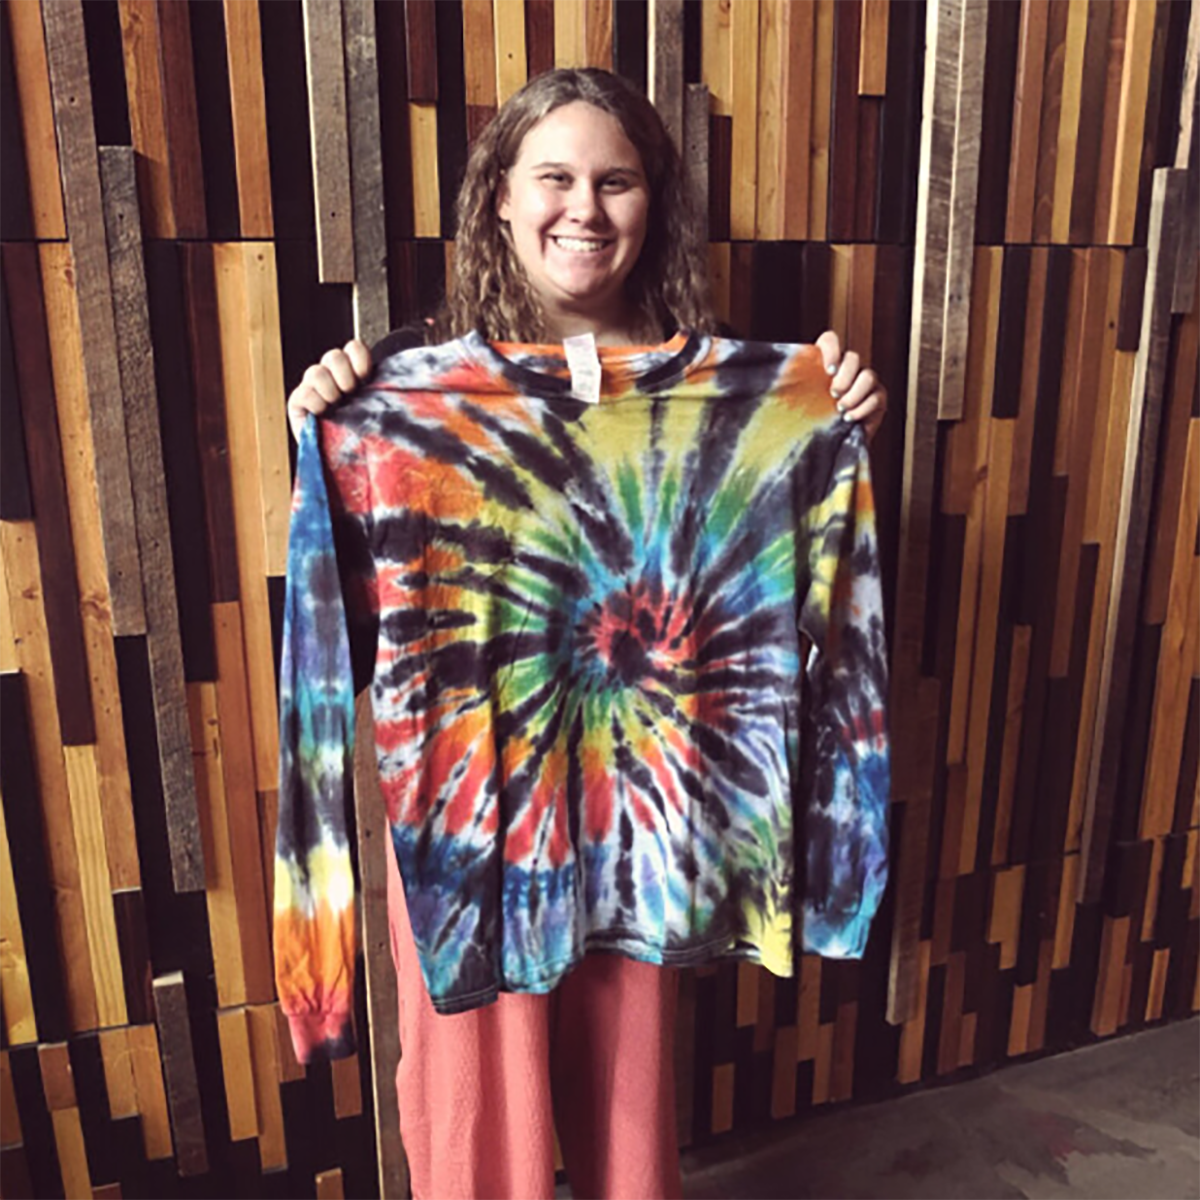 Photo of a young woman holding up a tie-dye shirt